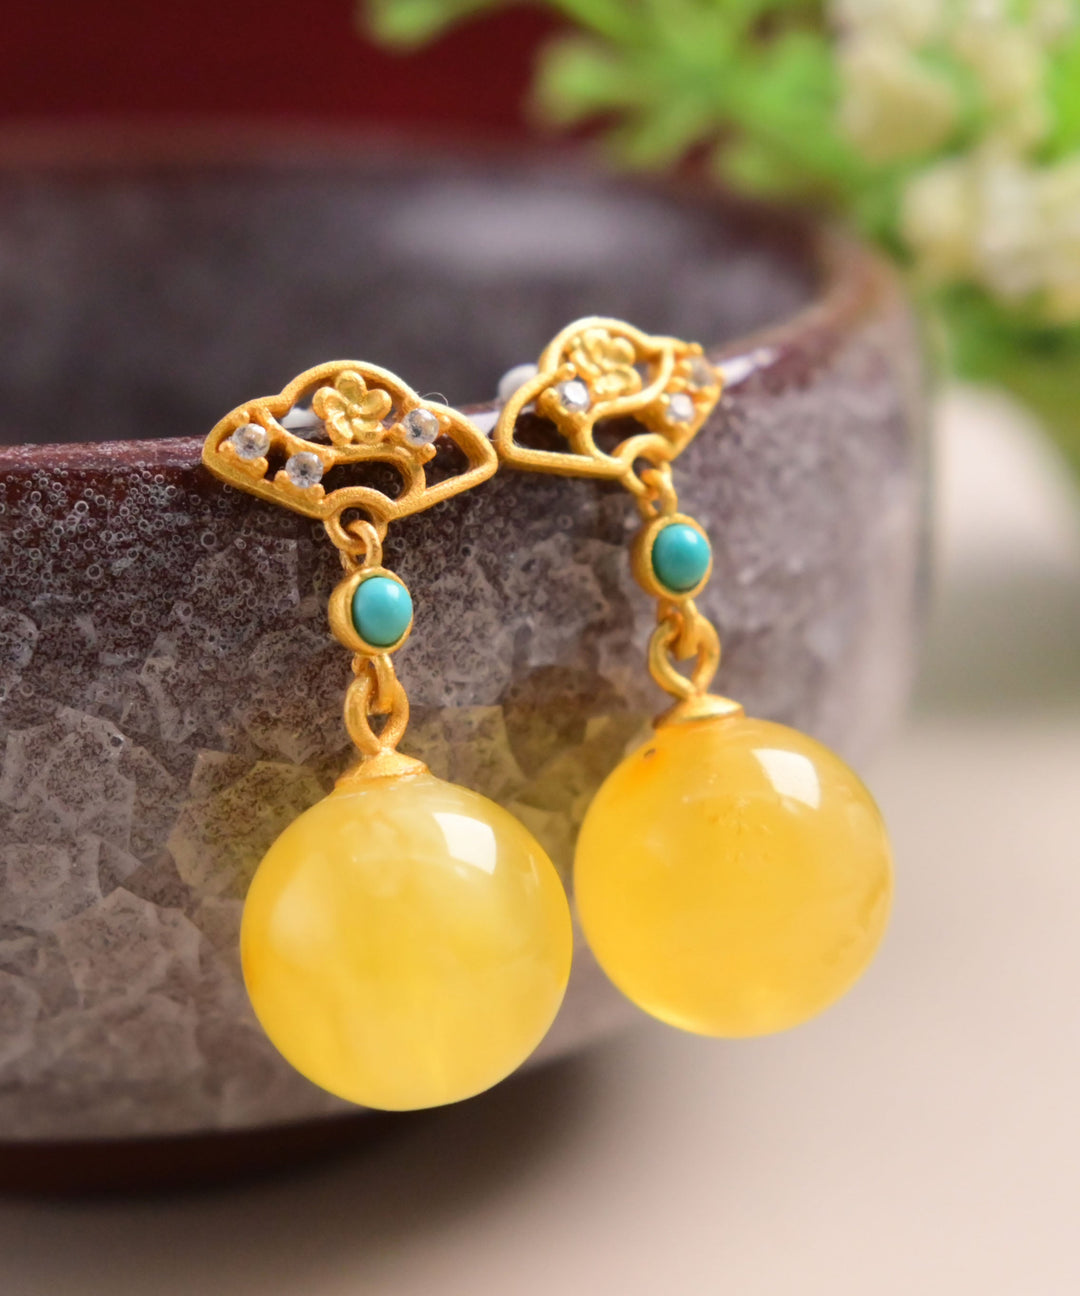 Unique Yellow Sterling Silver Overgild Turquoise Zircon Beeswax Drop Earrings